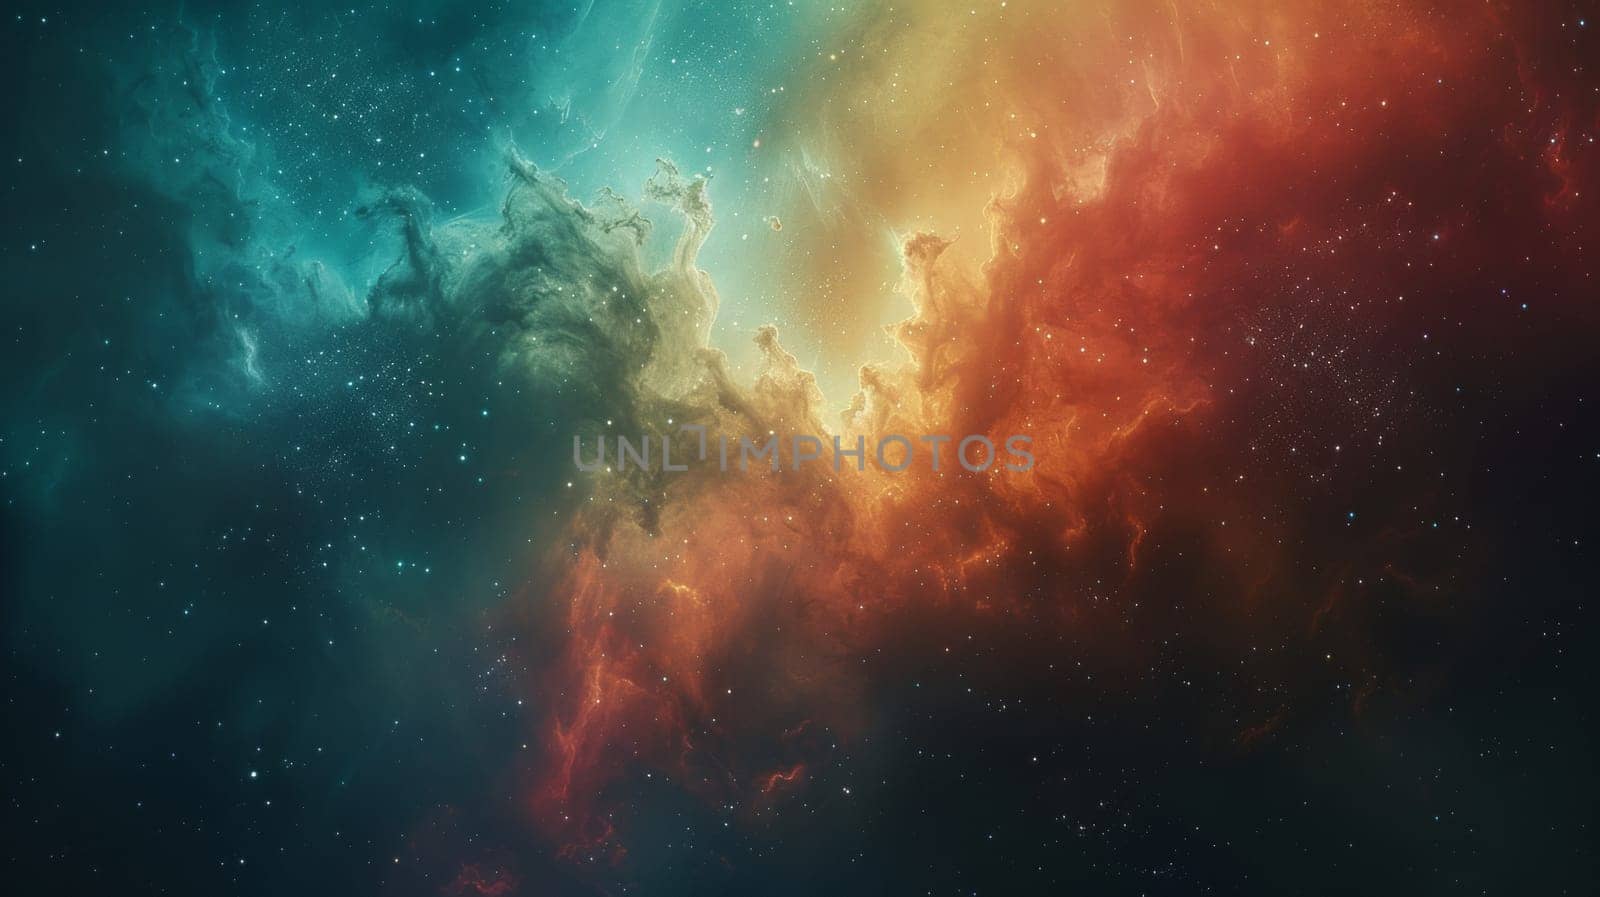 A colorful nebula in space with a bright blue and red color, AI by starush